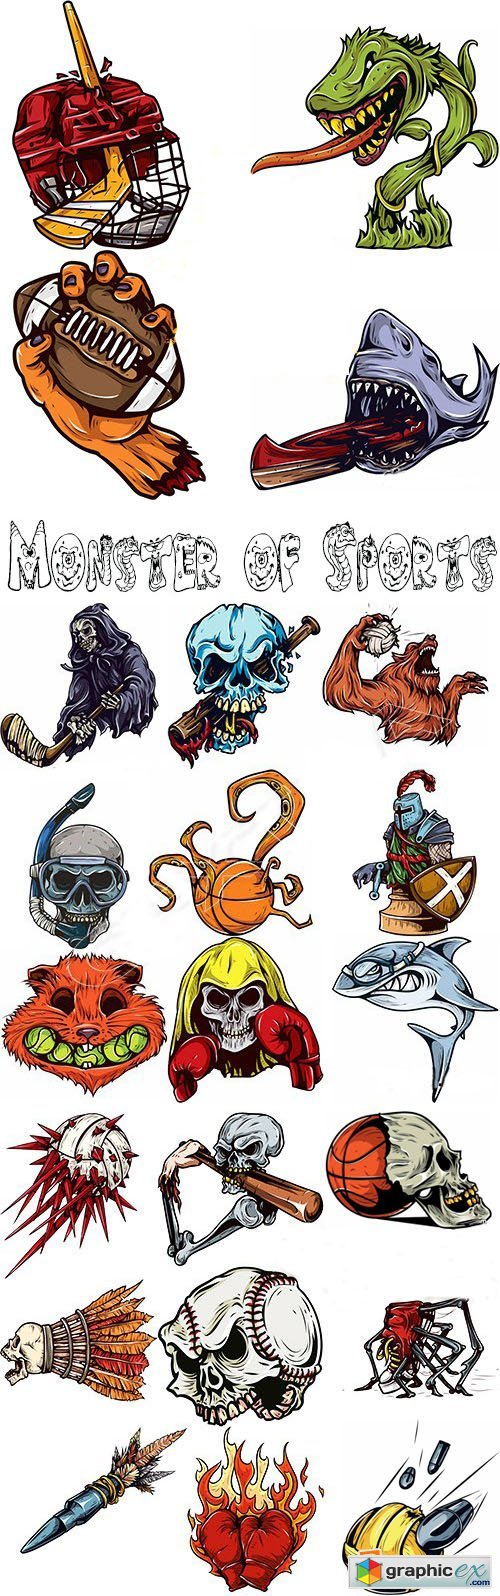 Monster of Sports Stock Image Vectors and Illustrations